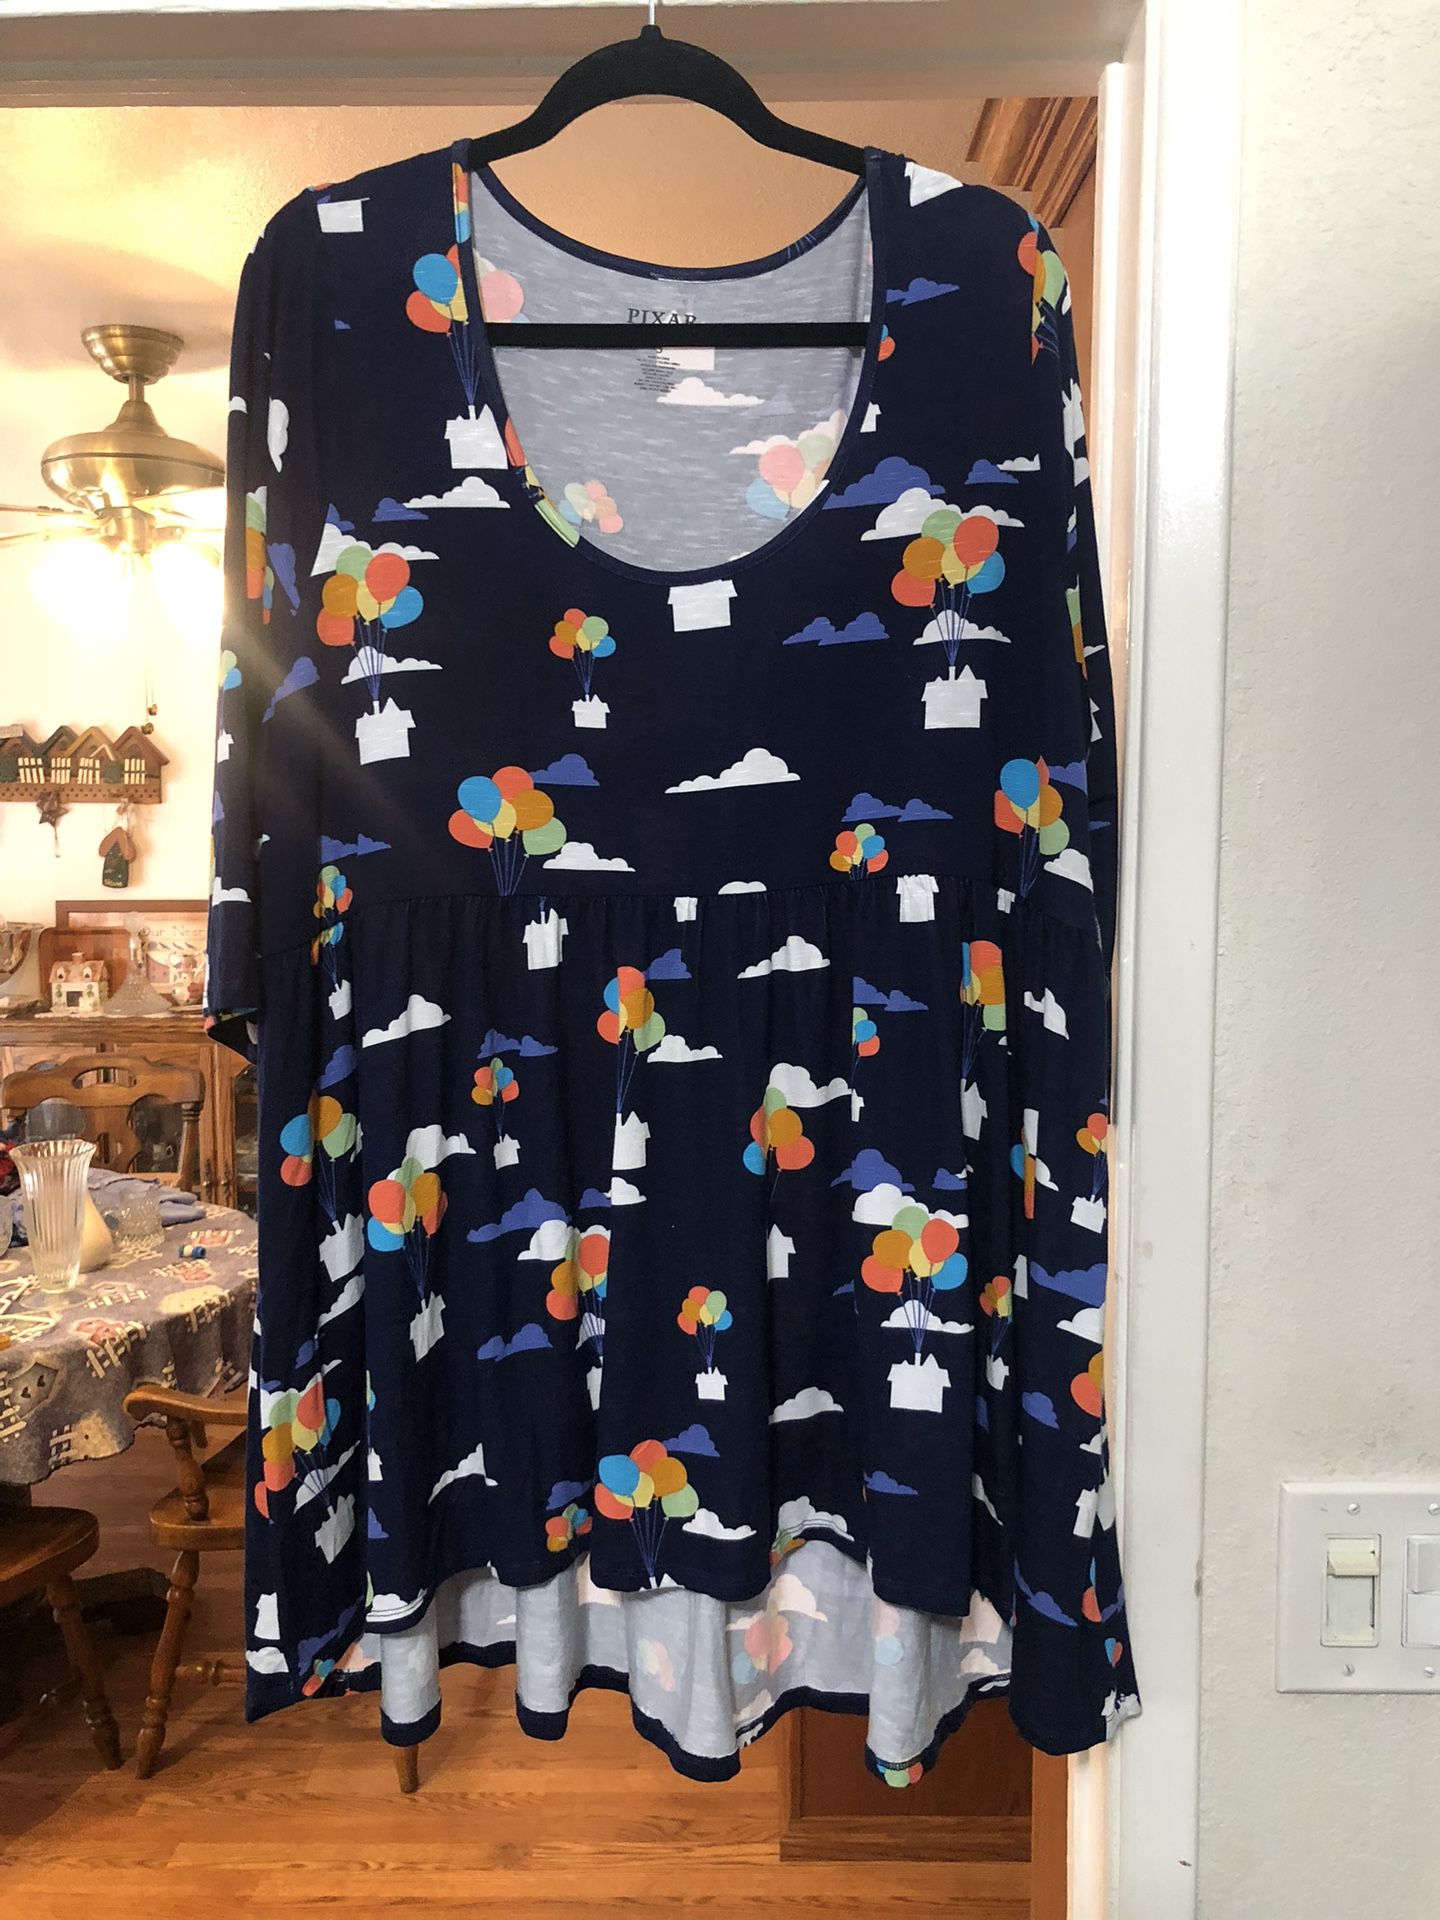 Disney Pixar Theme Tunic Top Size 3X.  Brand New With Tags Never Worn 